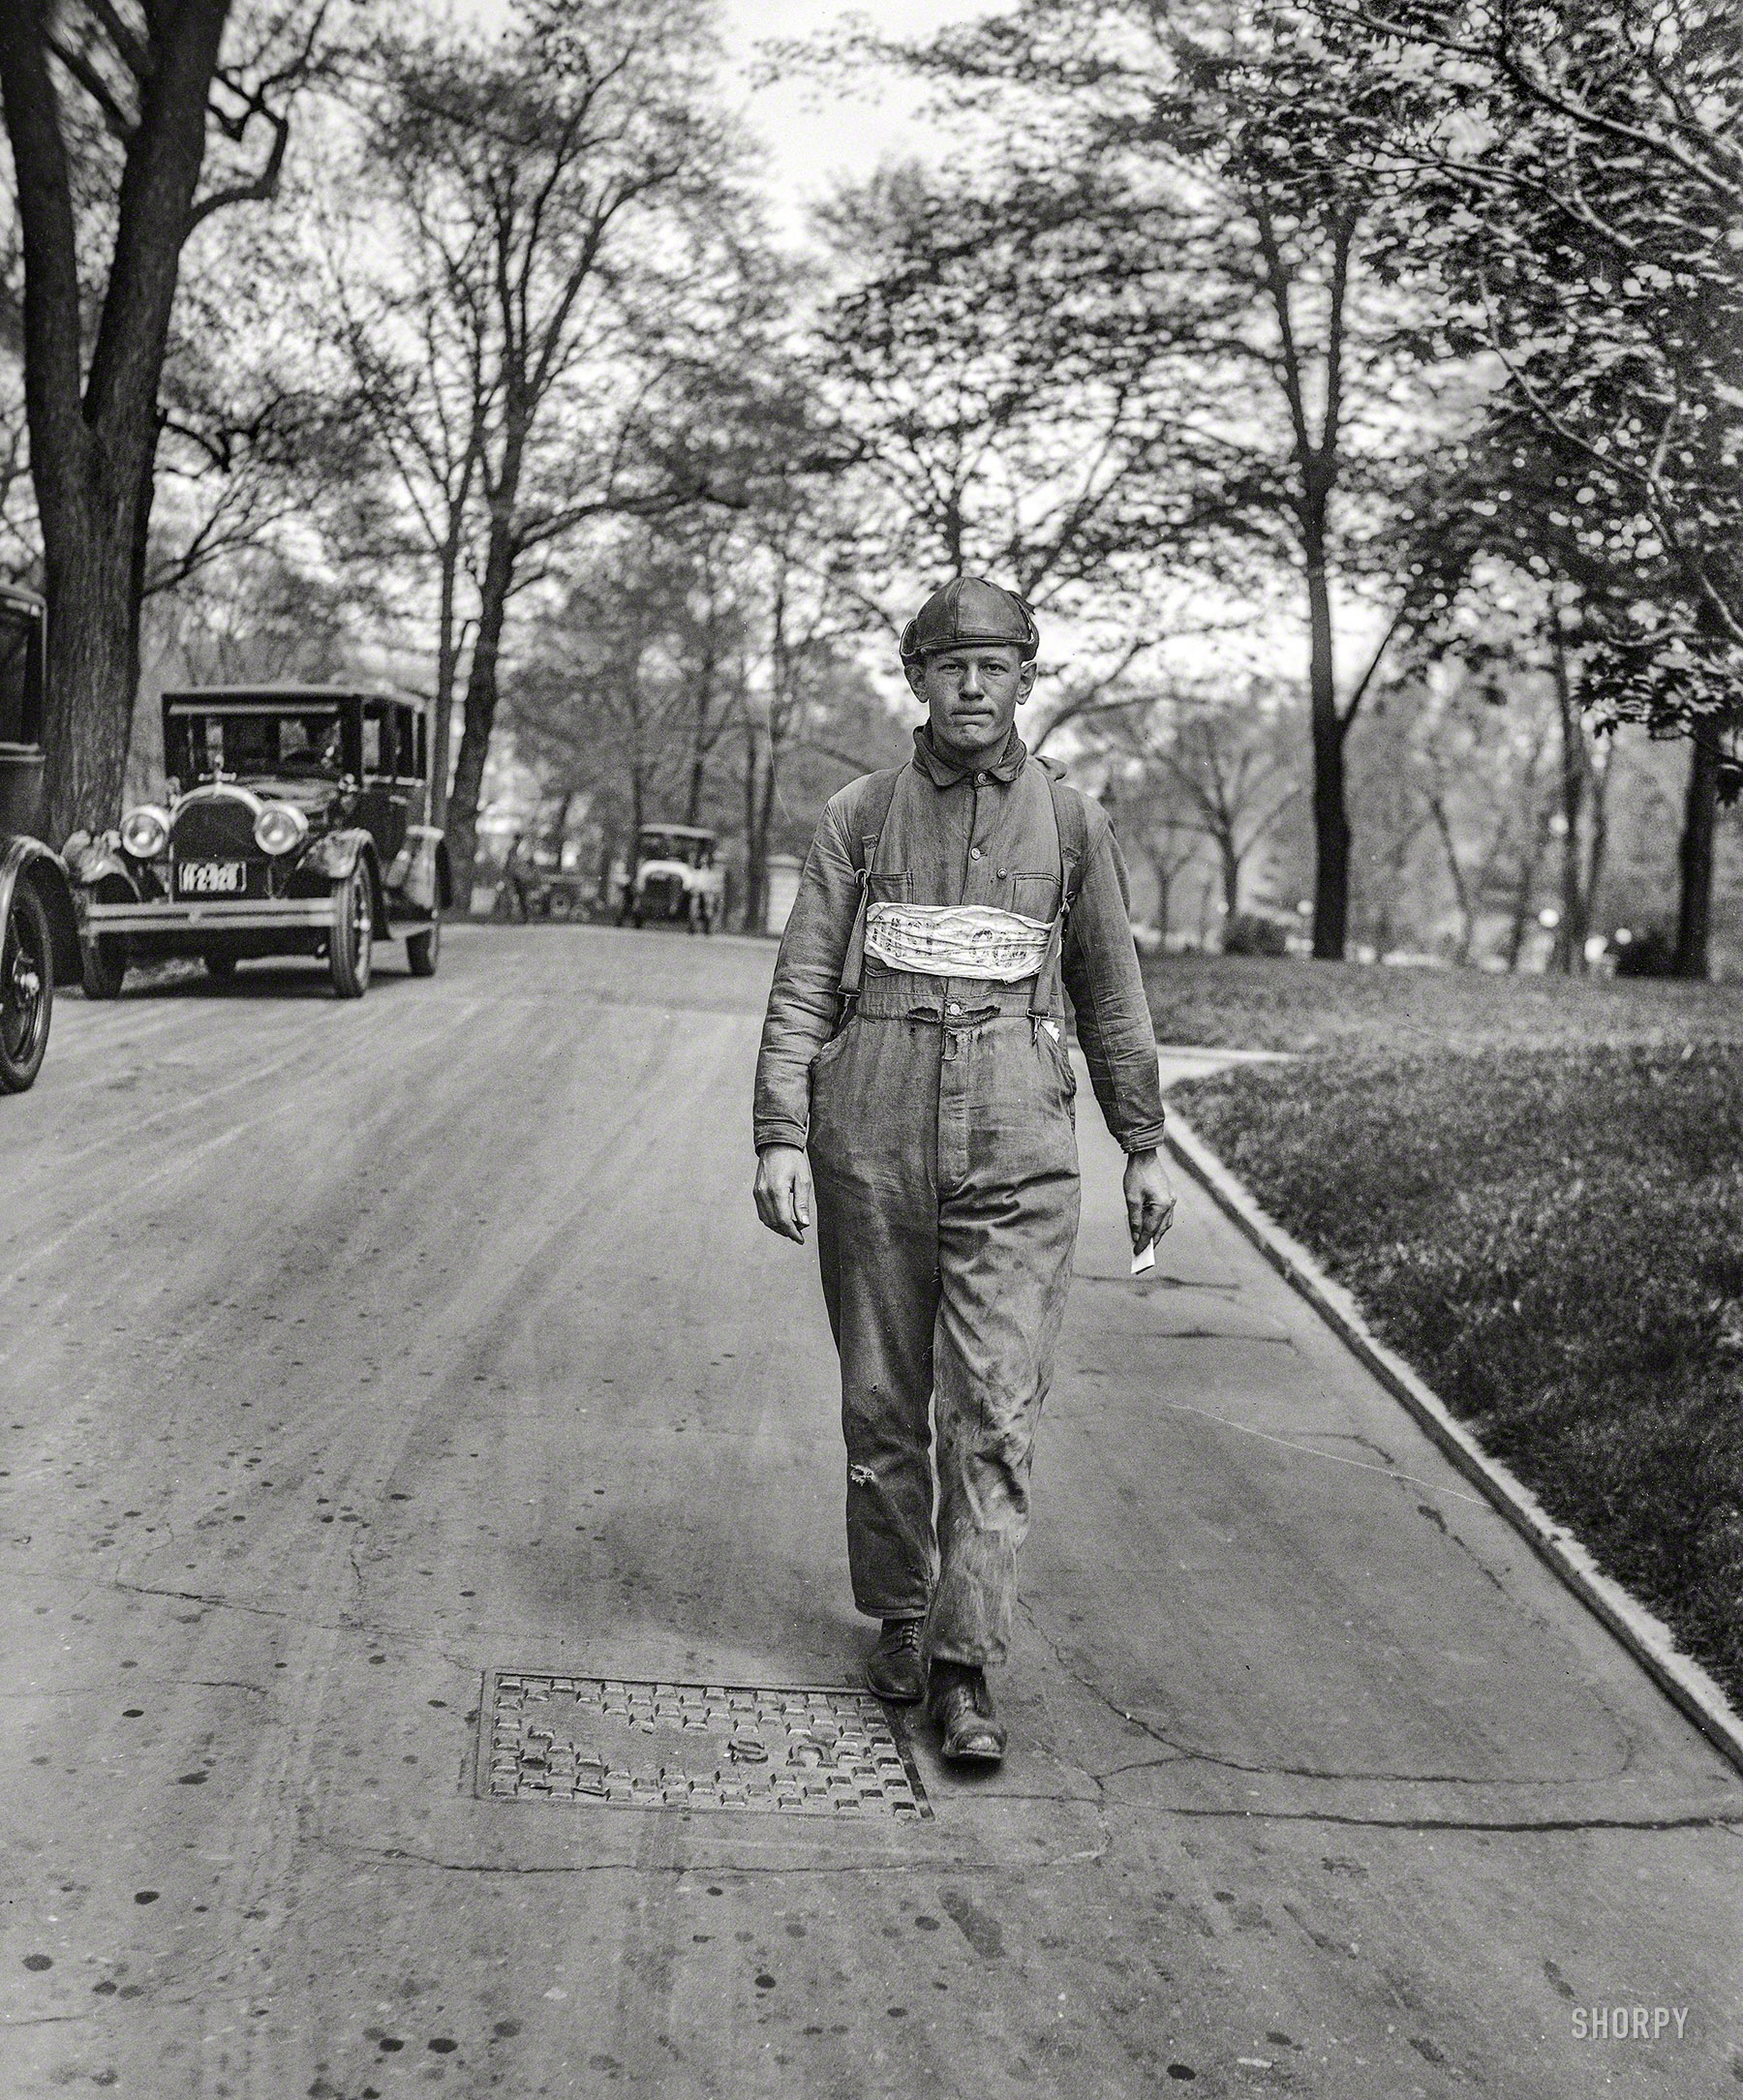 April 26, 1924. "Walking from San Francisco to New York for his health, W.E. Campbell stops at the White House. He left California Oct. 23, 1923." Harris & Ewing Collection glass negative. View full size.